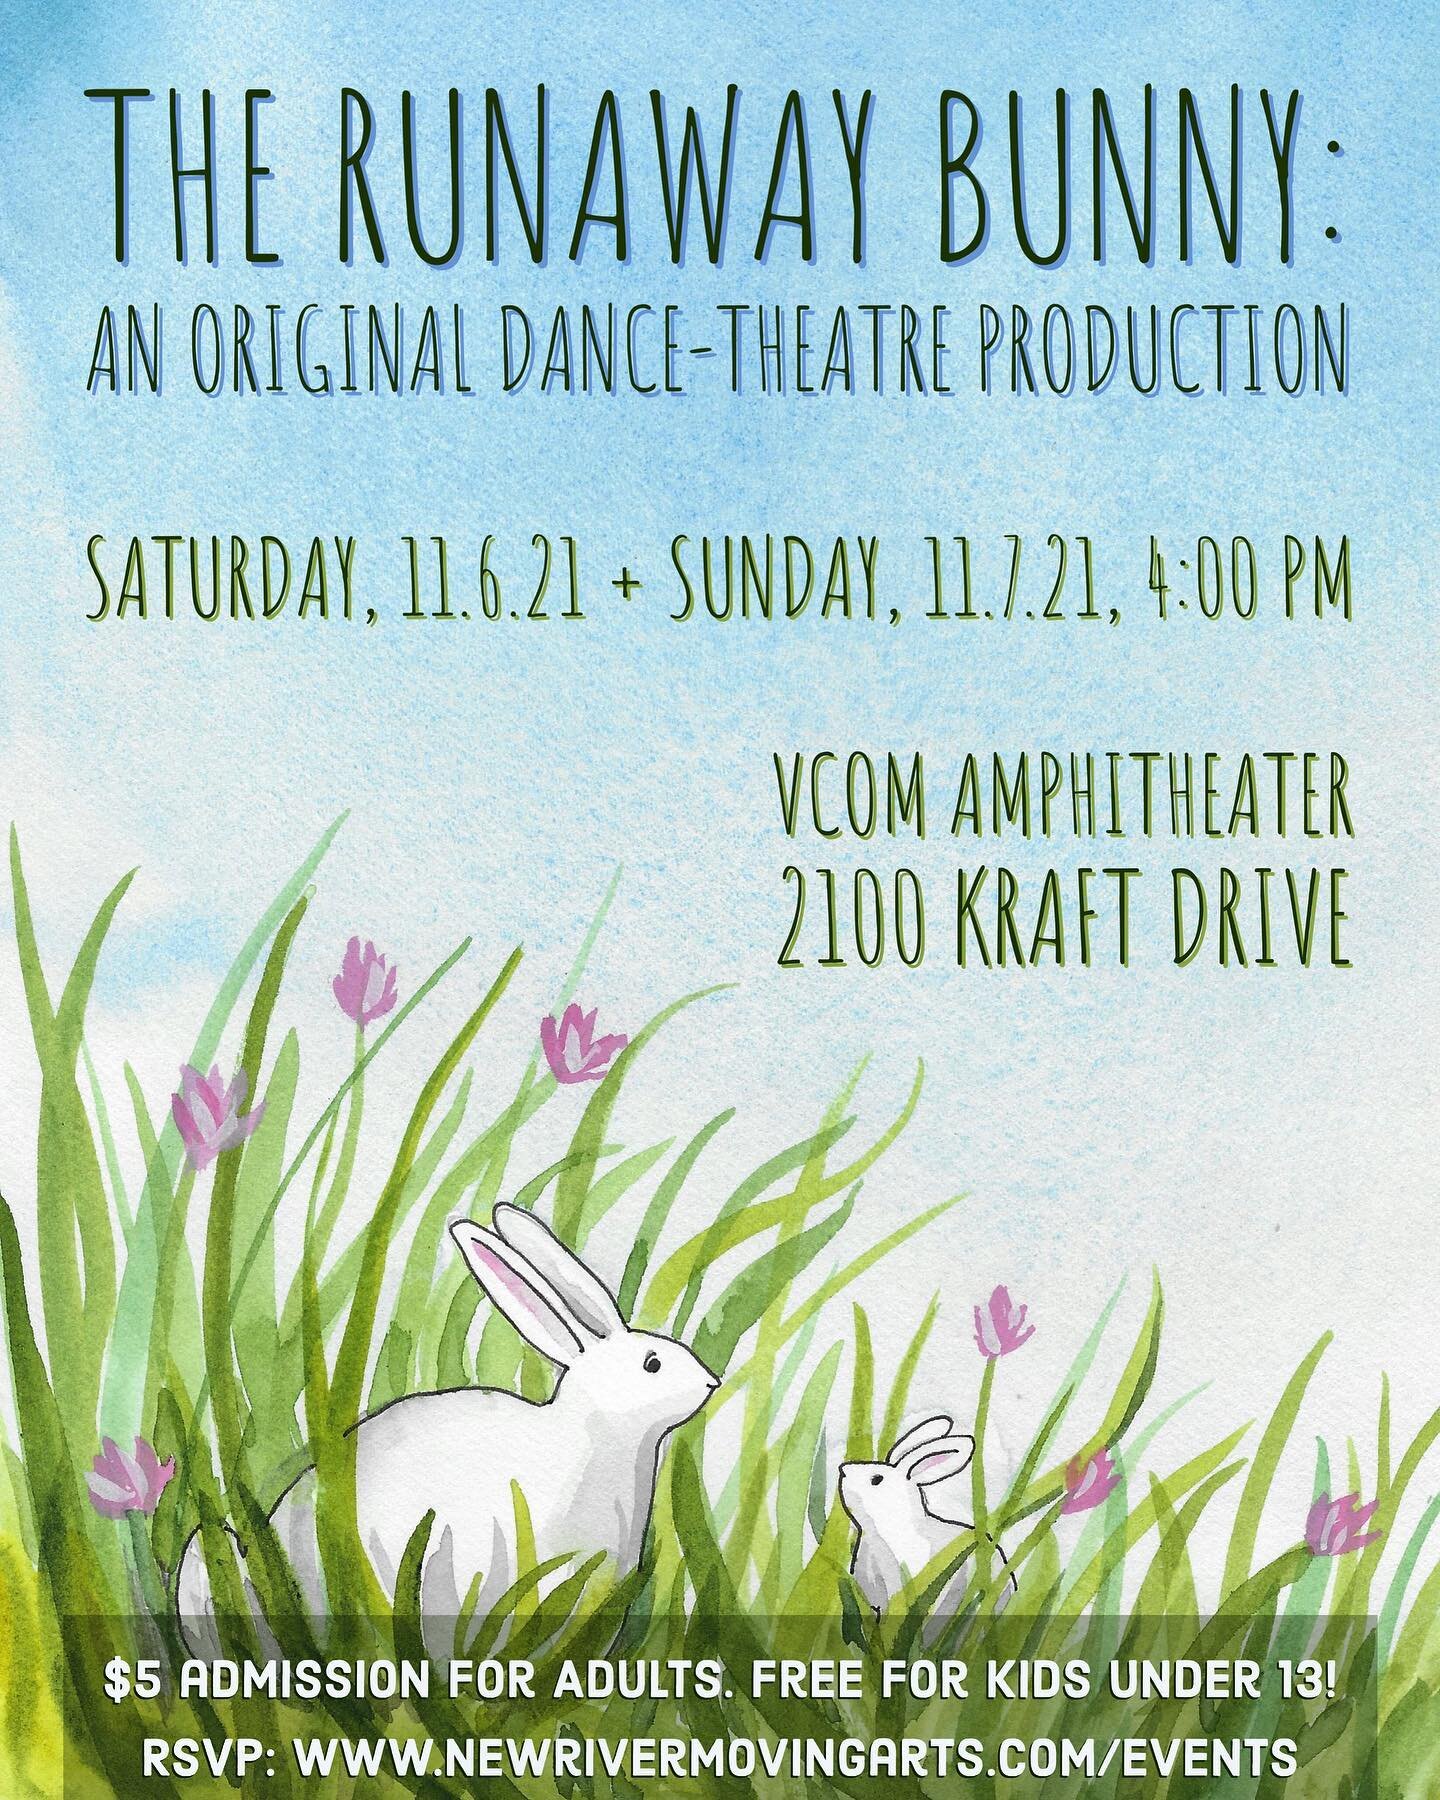 We are overjoyed to announce our FIRST EVER storybook dance concert, THE RUNAWAY BUNNY! This sweet and family friendly show will bring Margaret Wise Brown&rsquo;s beloved book to life through movement and text. All of our youth classes will be perfor